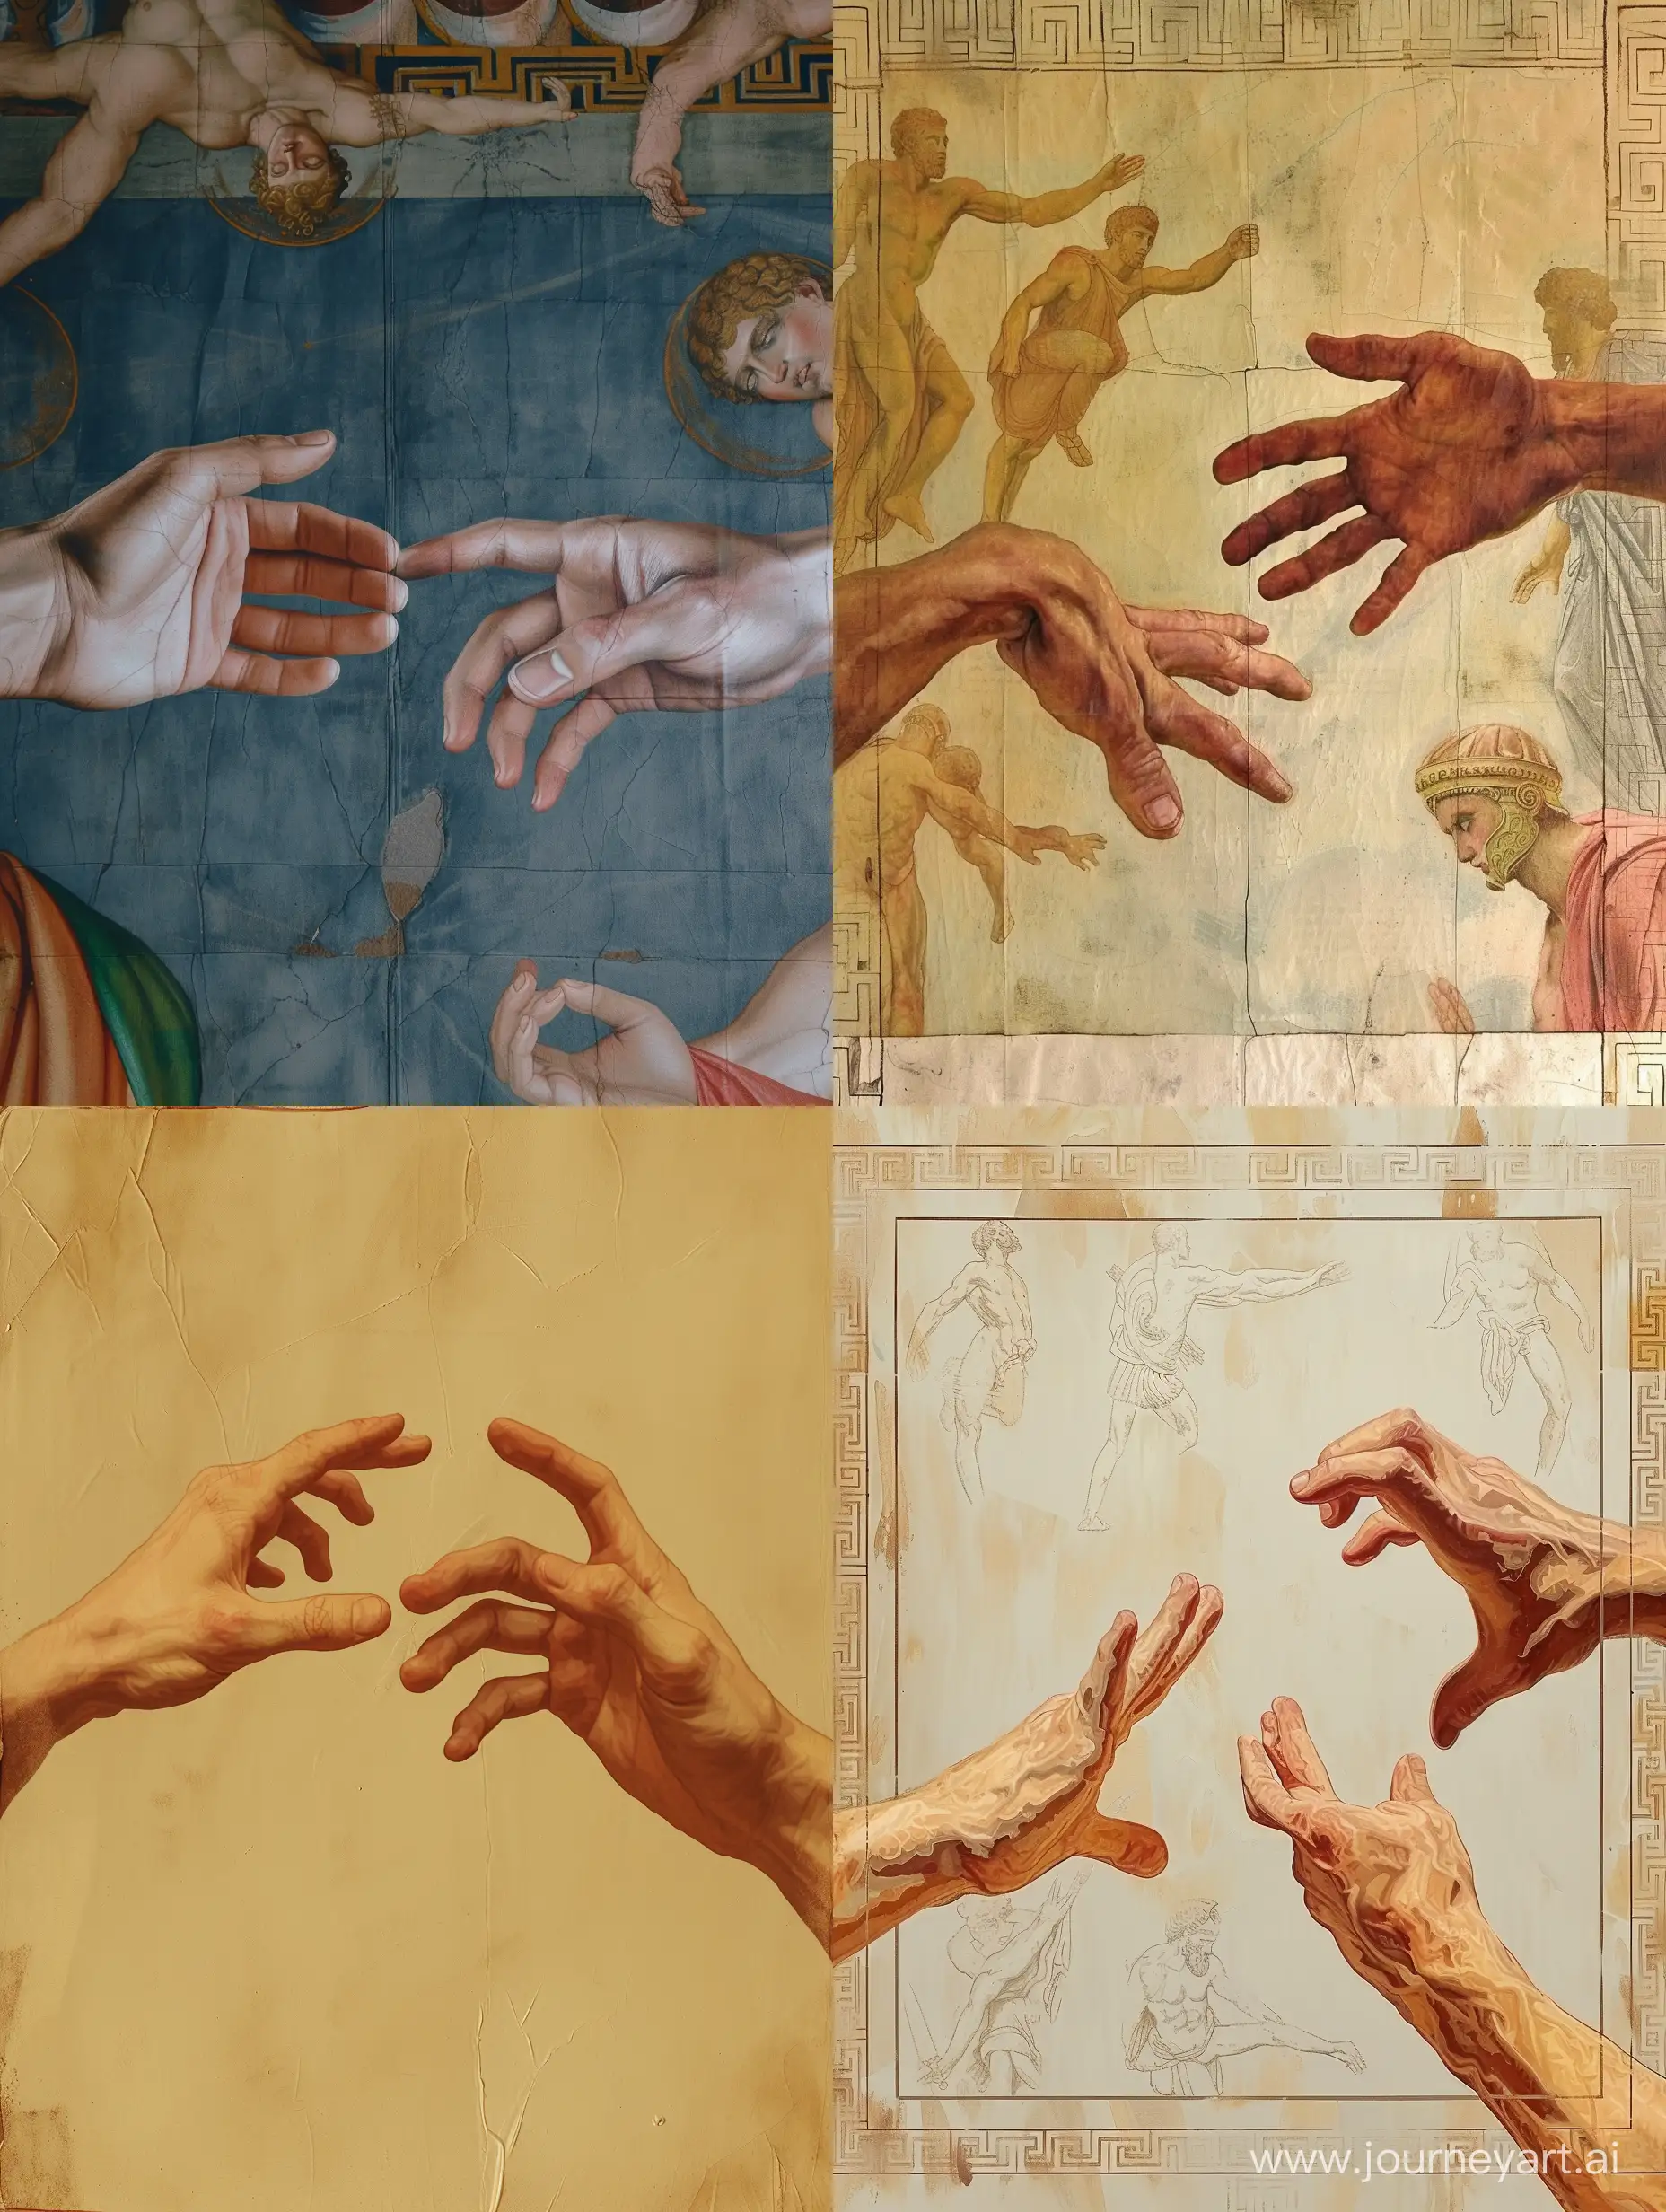 two hands reaching out to each other from a painting, the background is minimalistic in the style of the ancient Olympic Games, everything is framed like in a painting with Greece gods